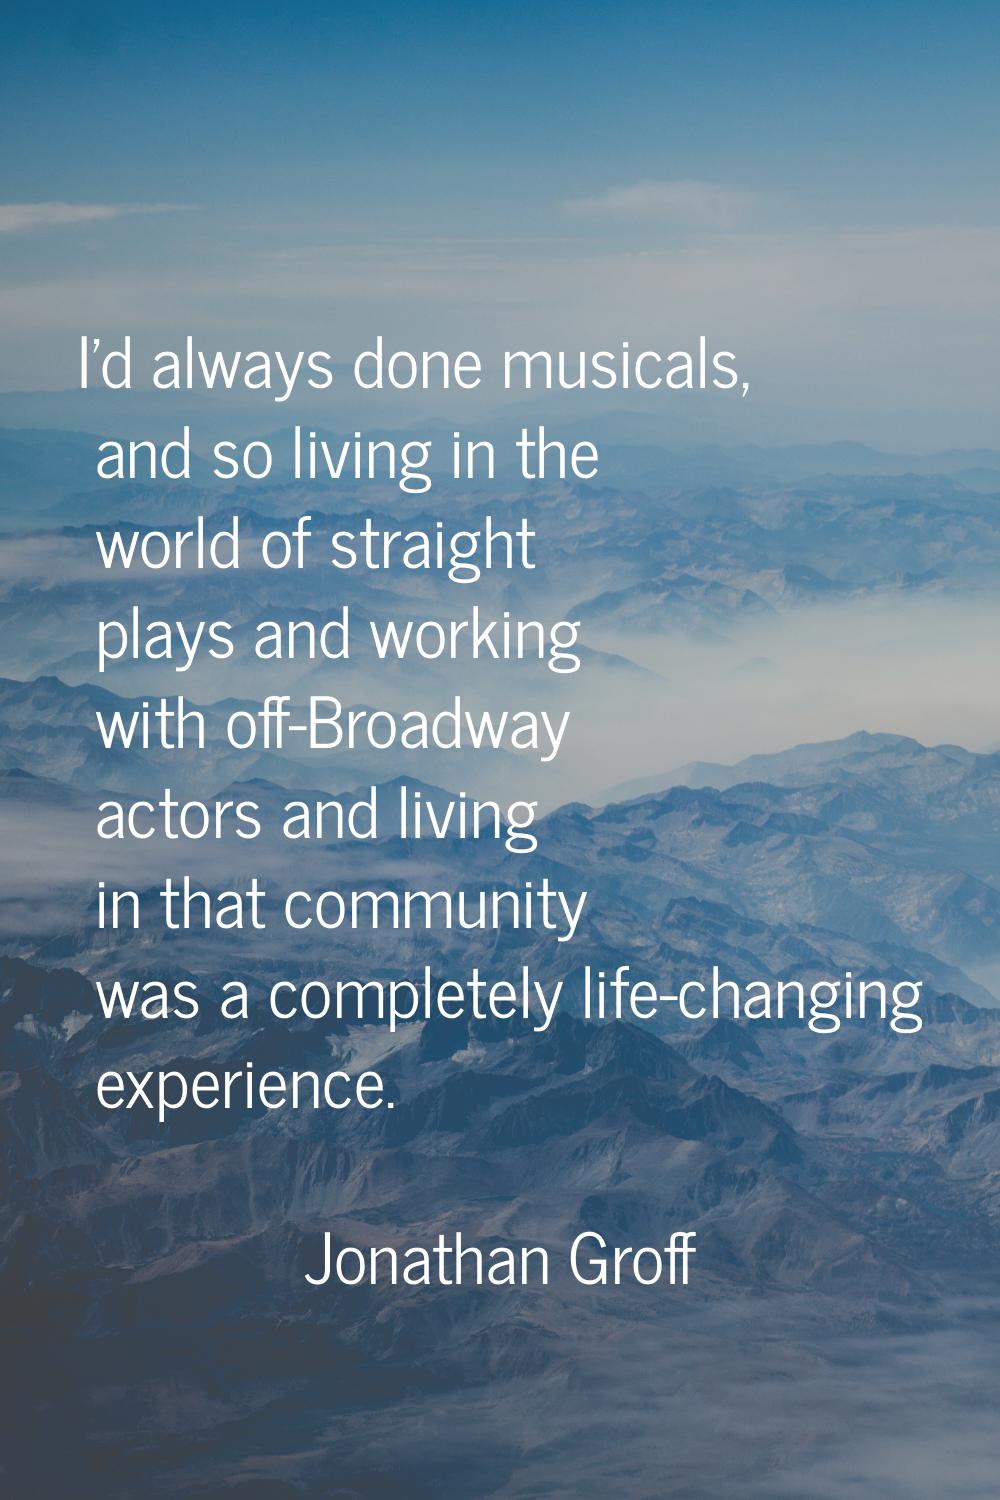 I'd always done musicals, and so living in the world of straight plays and working with off-Broadwa